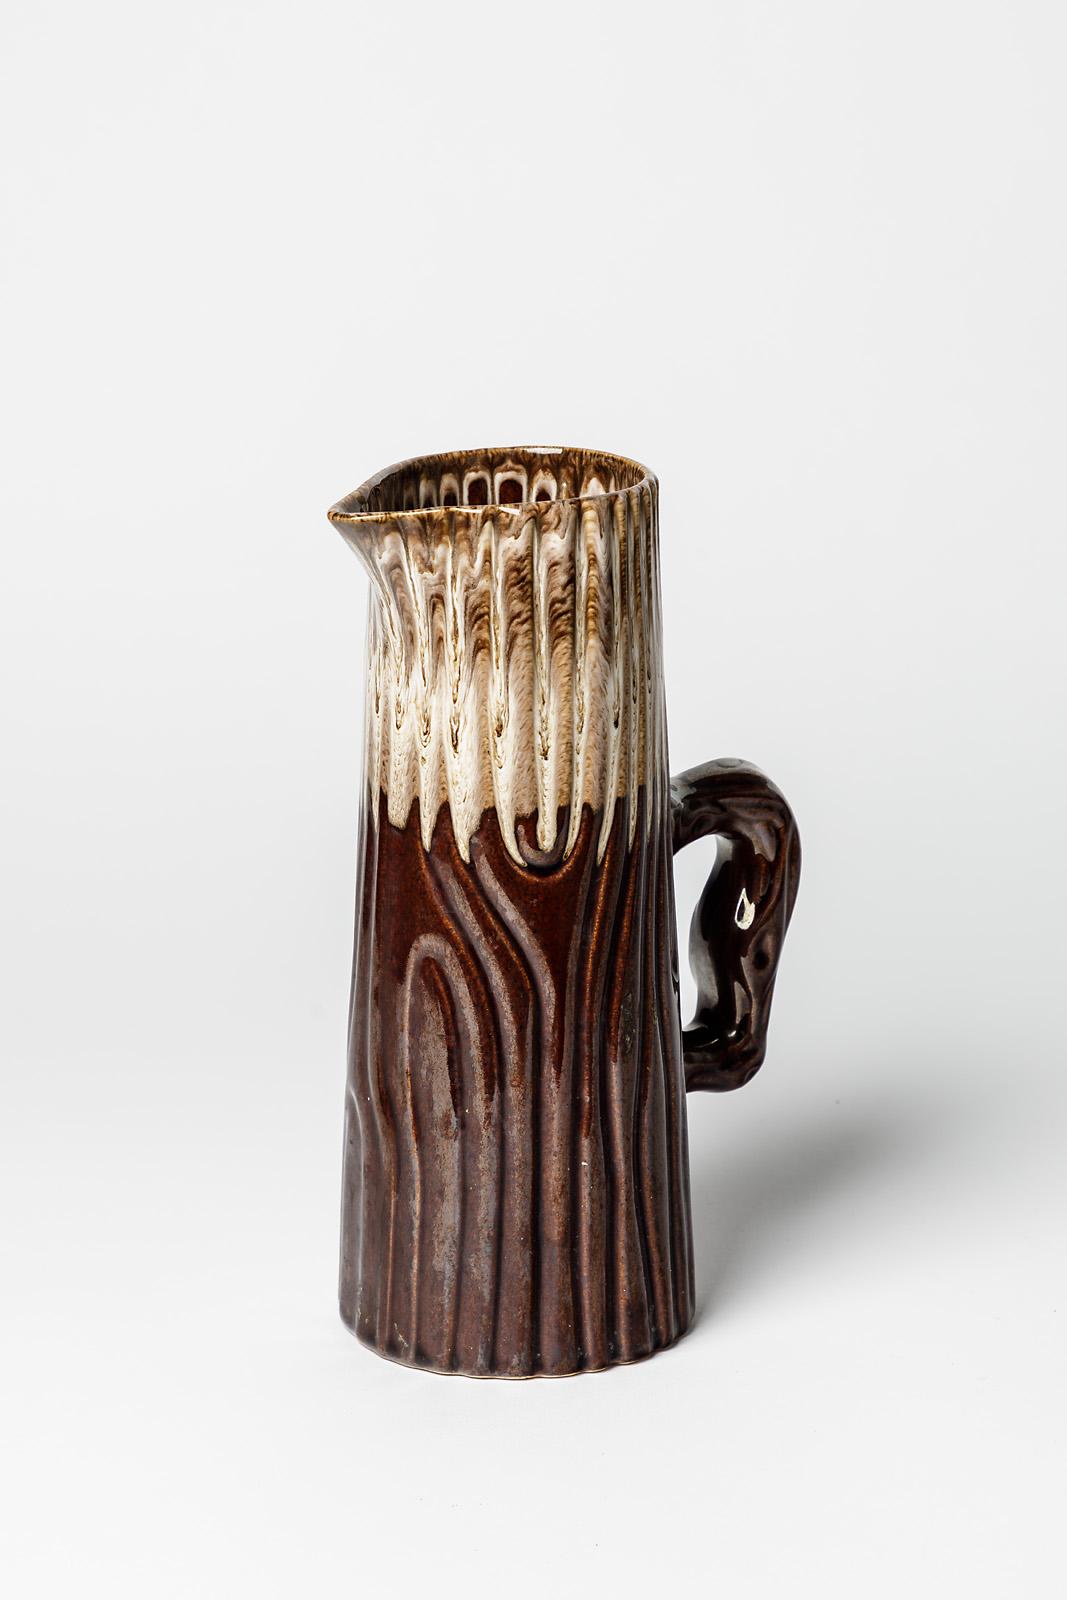 French 20th Century Design Imiation Wood Ceramic Pitcher Brown and White circa 1970 For Sale